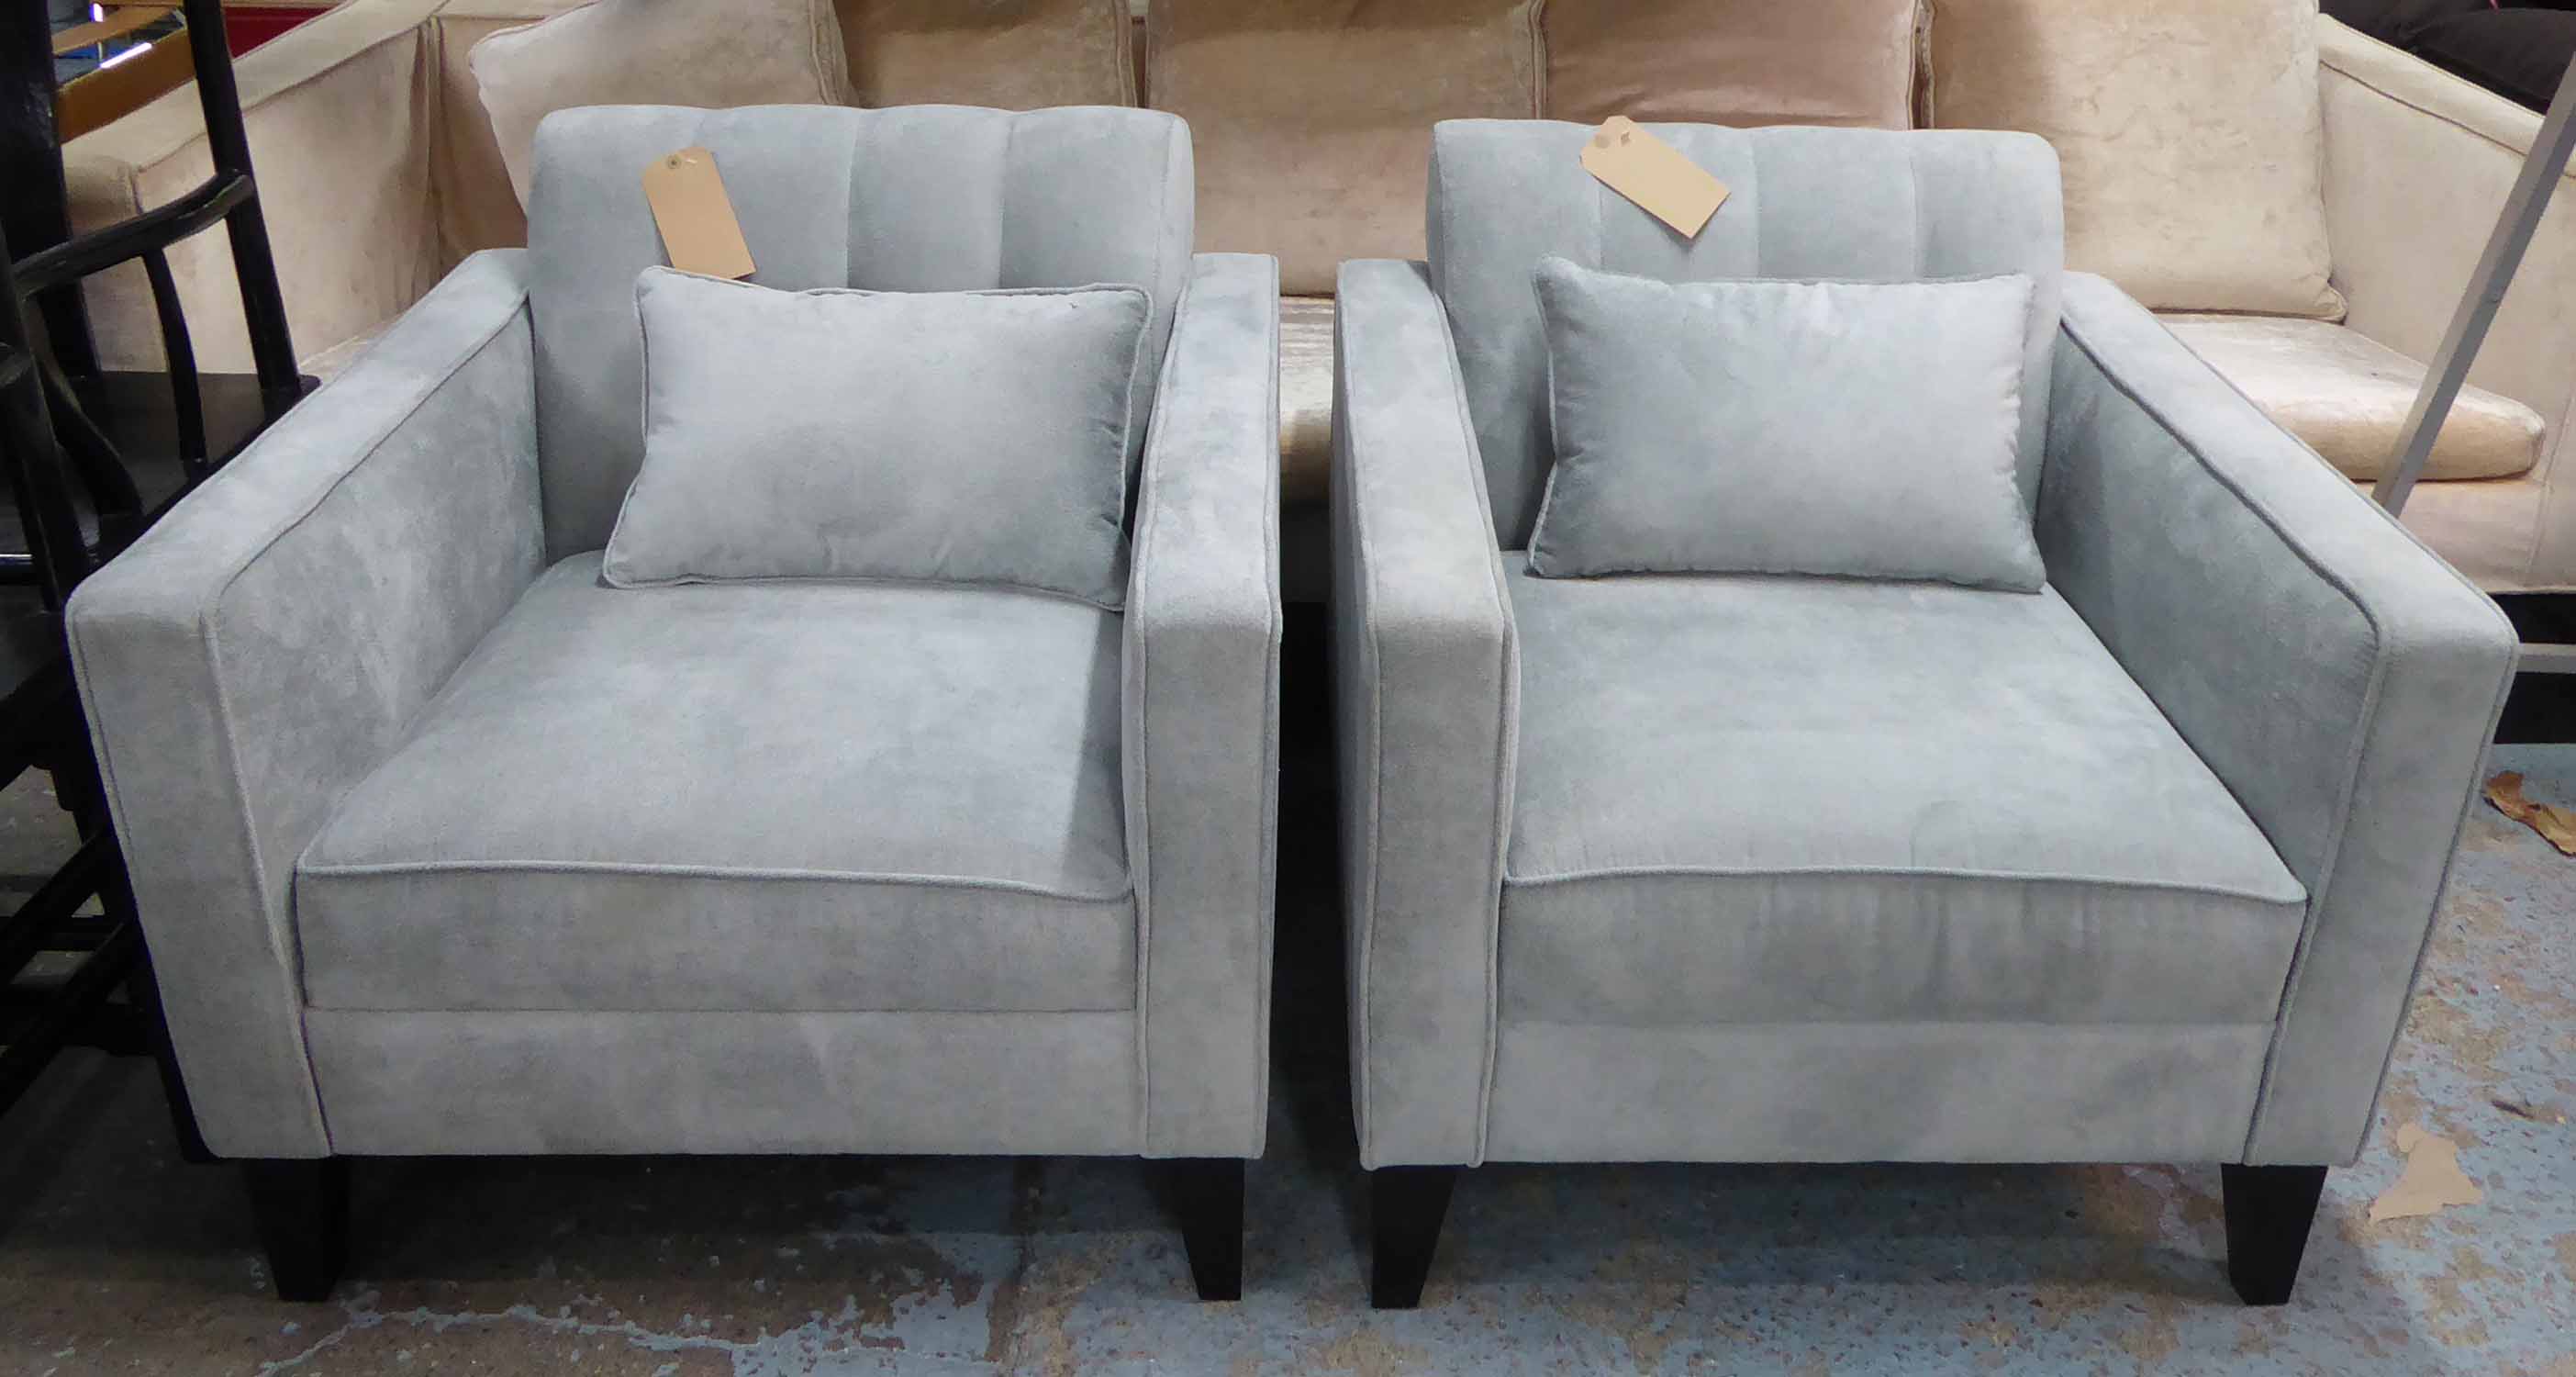 ARMCHAIRS, a pair, in grey upholstery to match previous lot, 80cm W x 83cm x 74cm H.